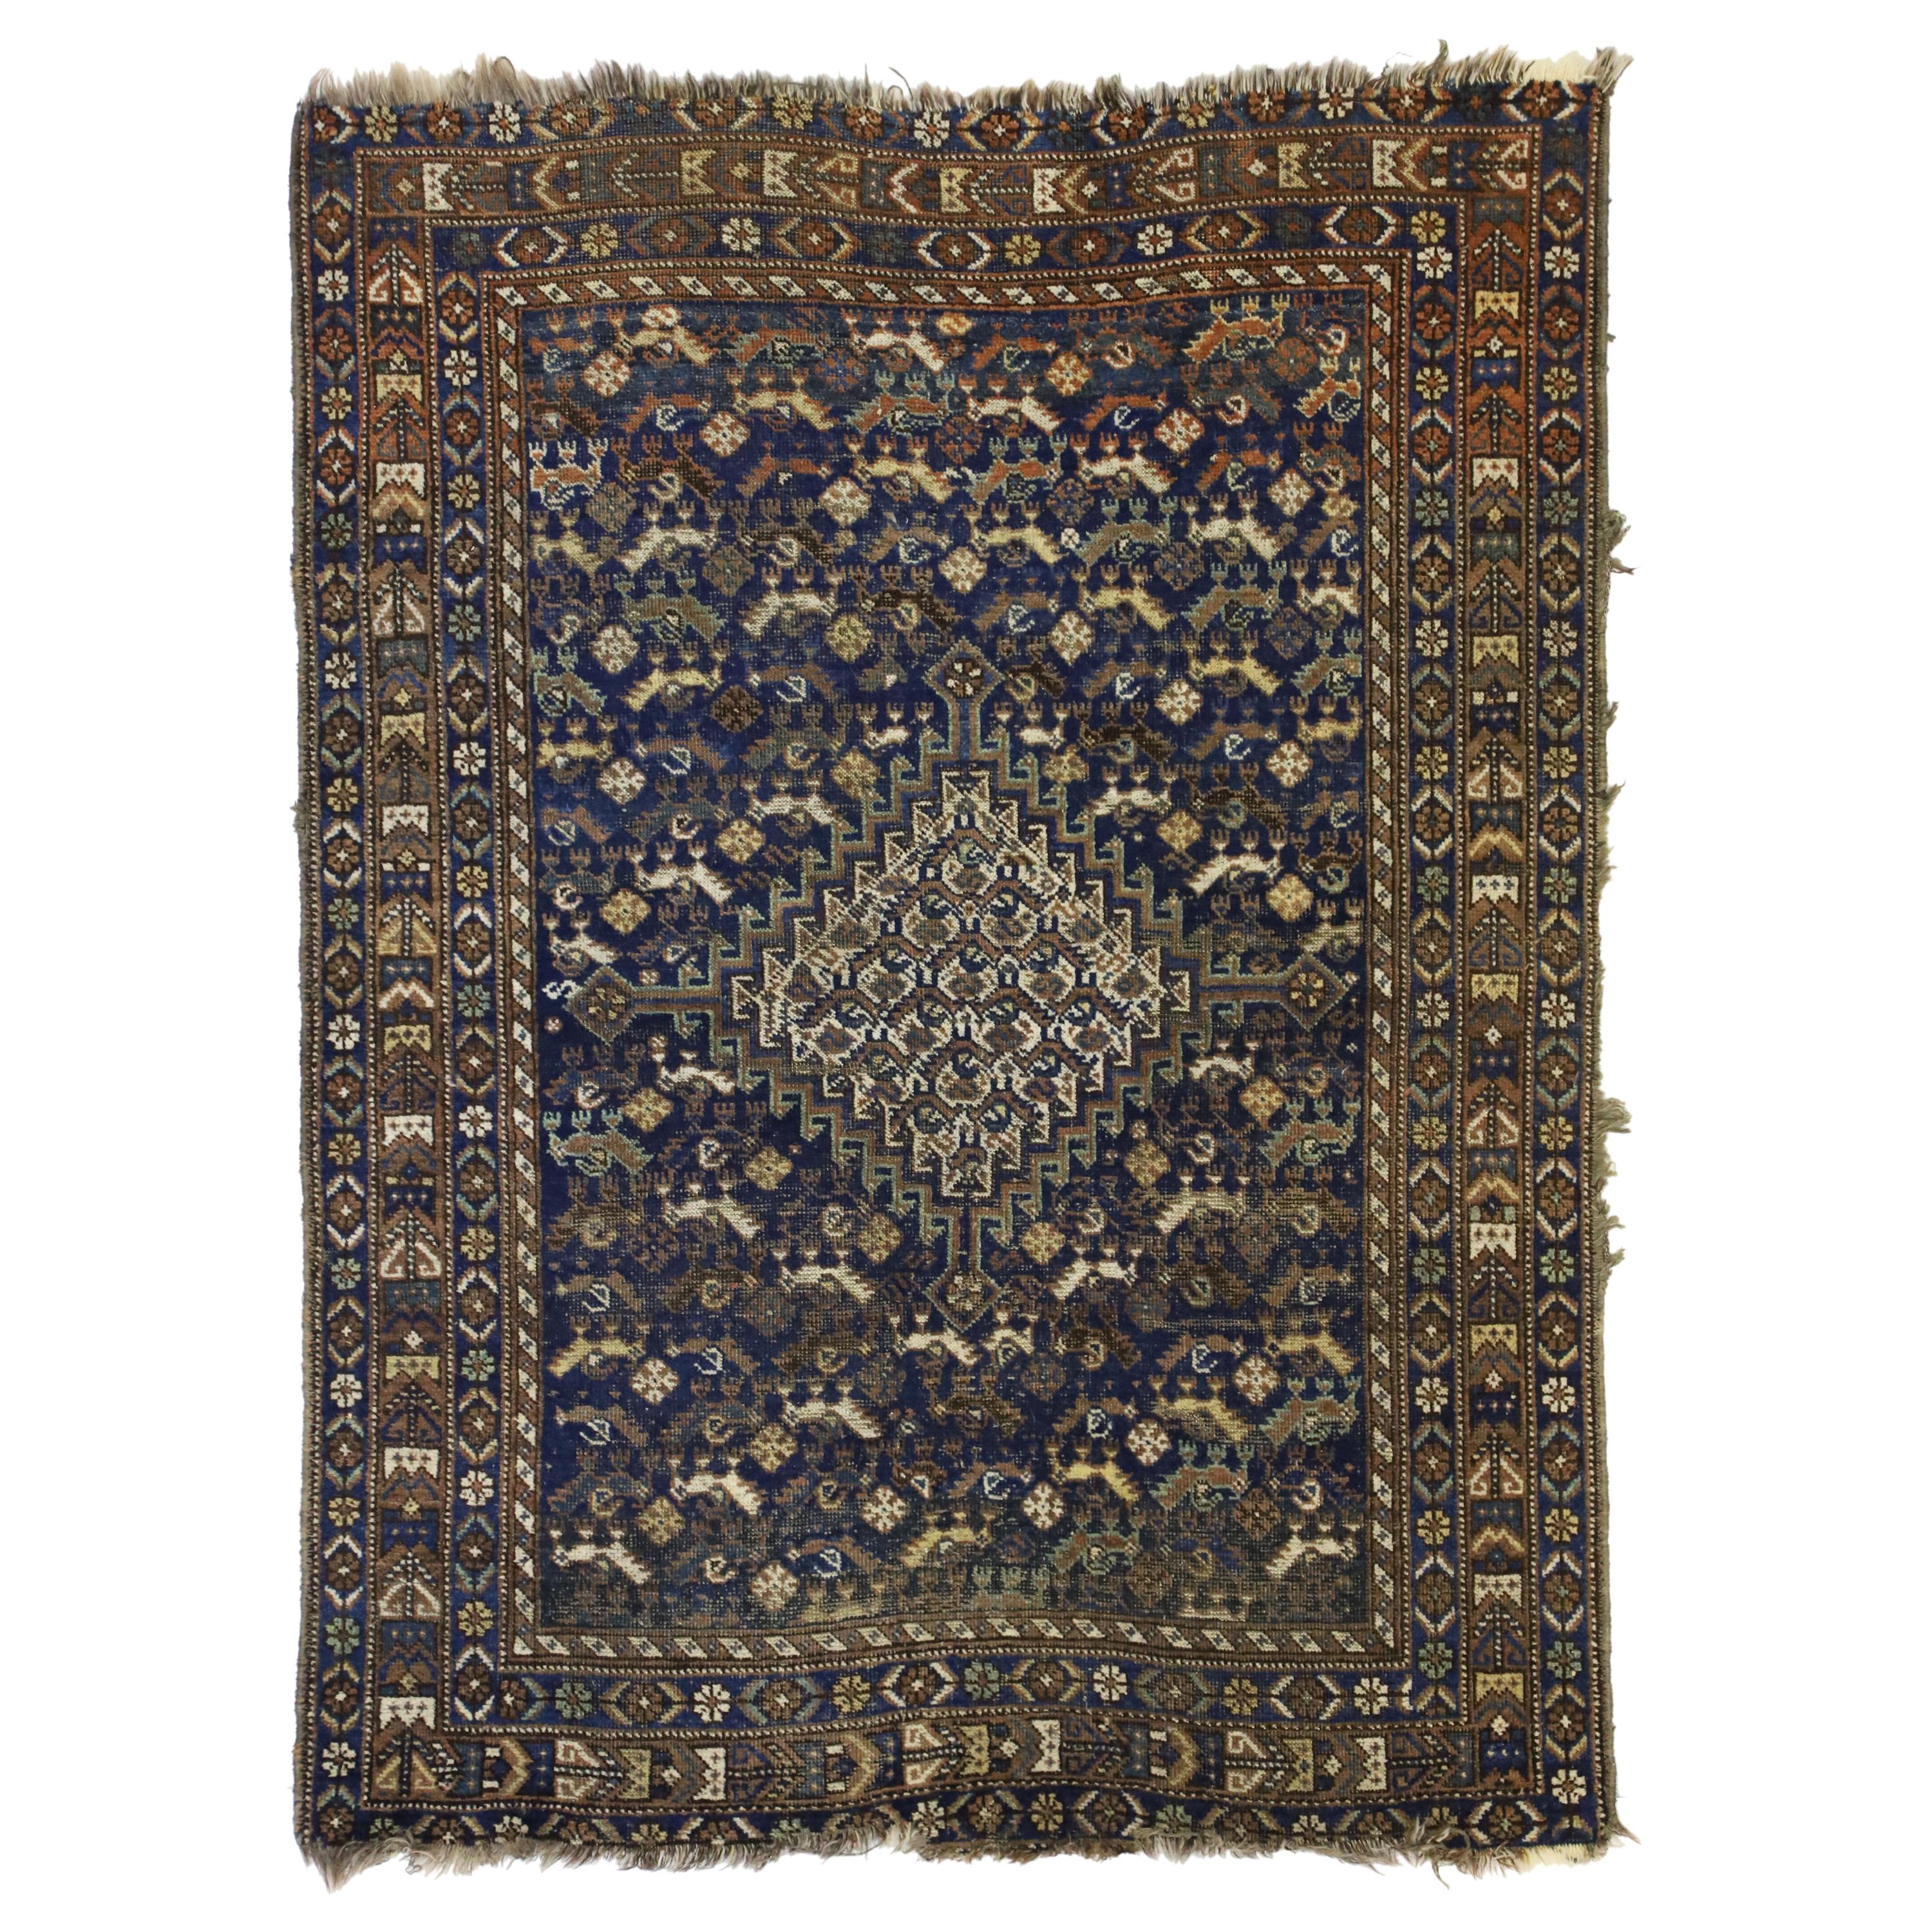 Worn-In Distressed Antique Persian Shiraz Accent Rug with Adirondack Lodge Style For Sale